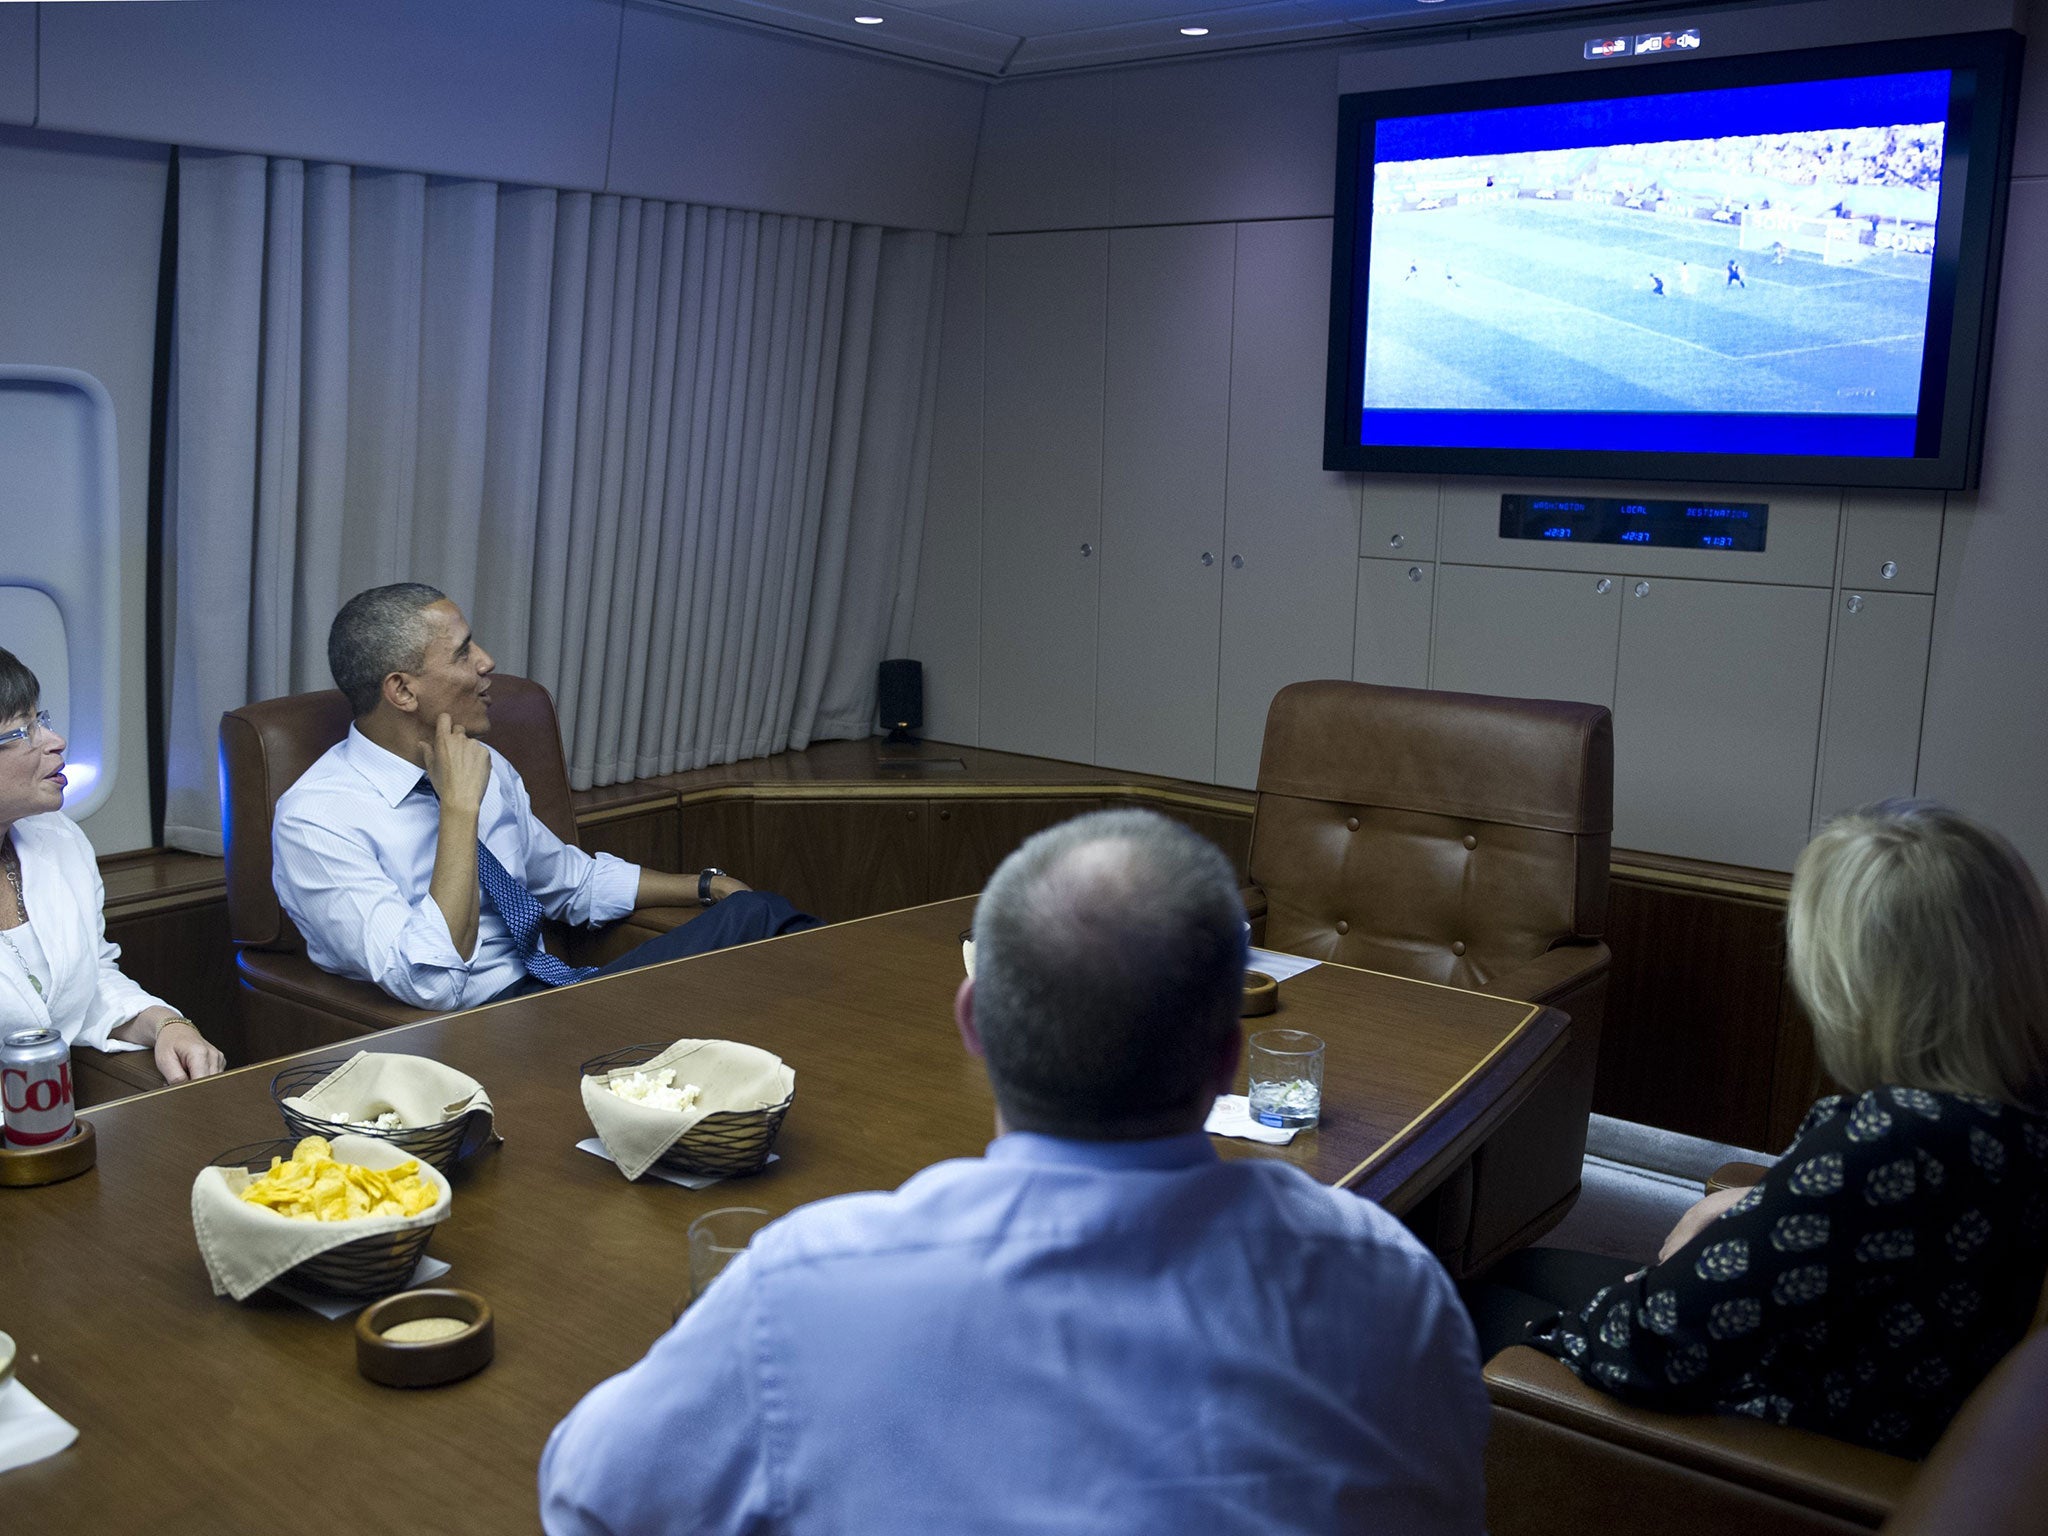 US President Barack Obama and Senior Advisor Valerie Jarrett (L) watch the 2014 World Cup match between the US and Germany while en route to Minnepolis